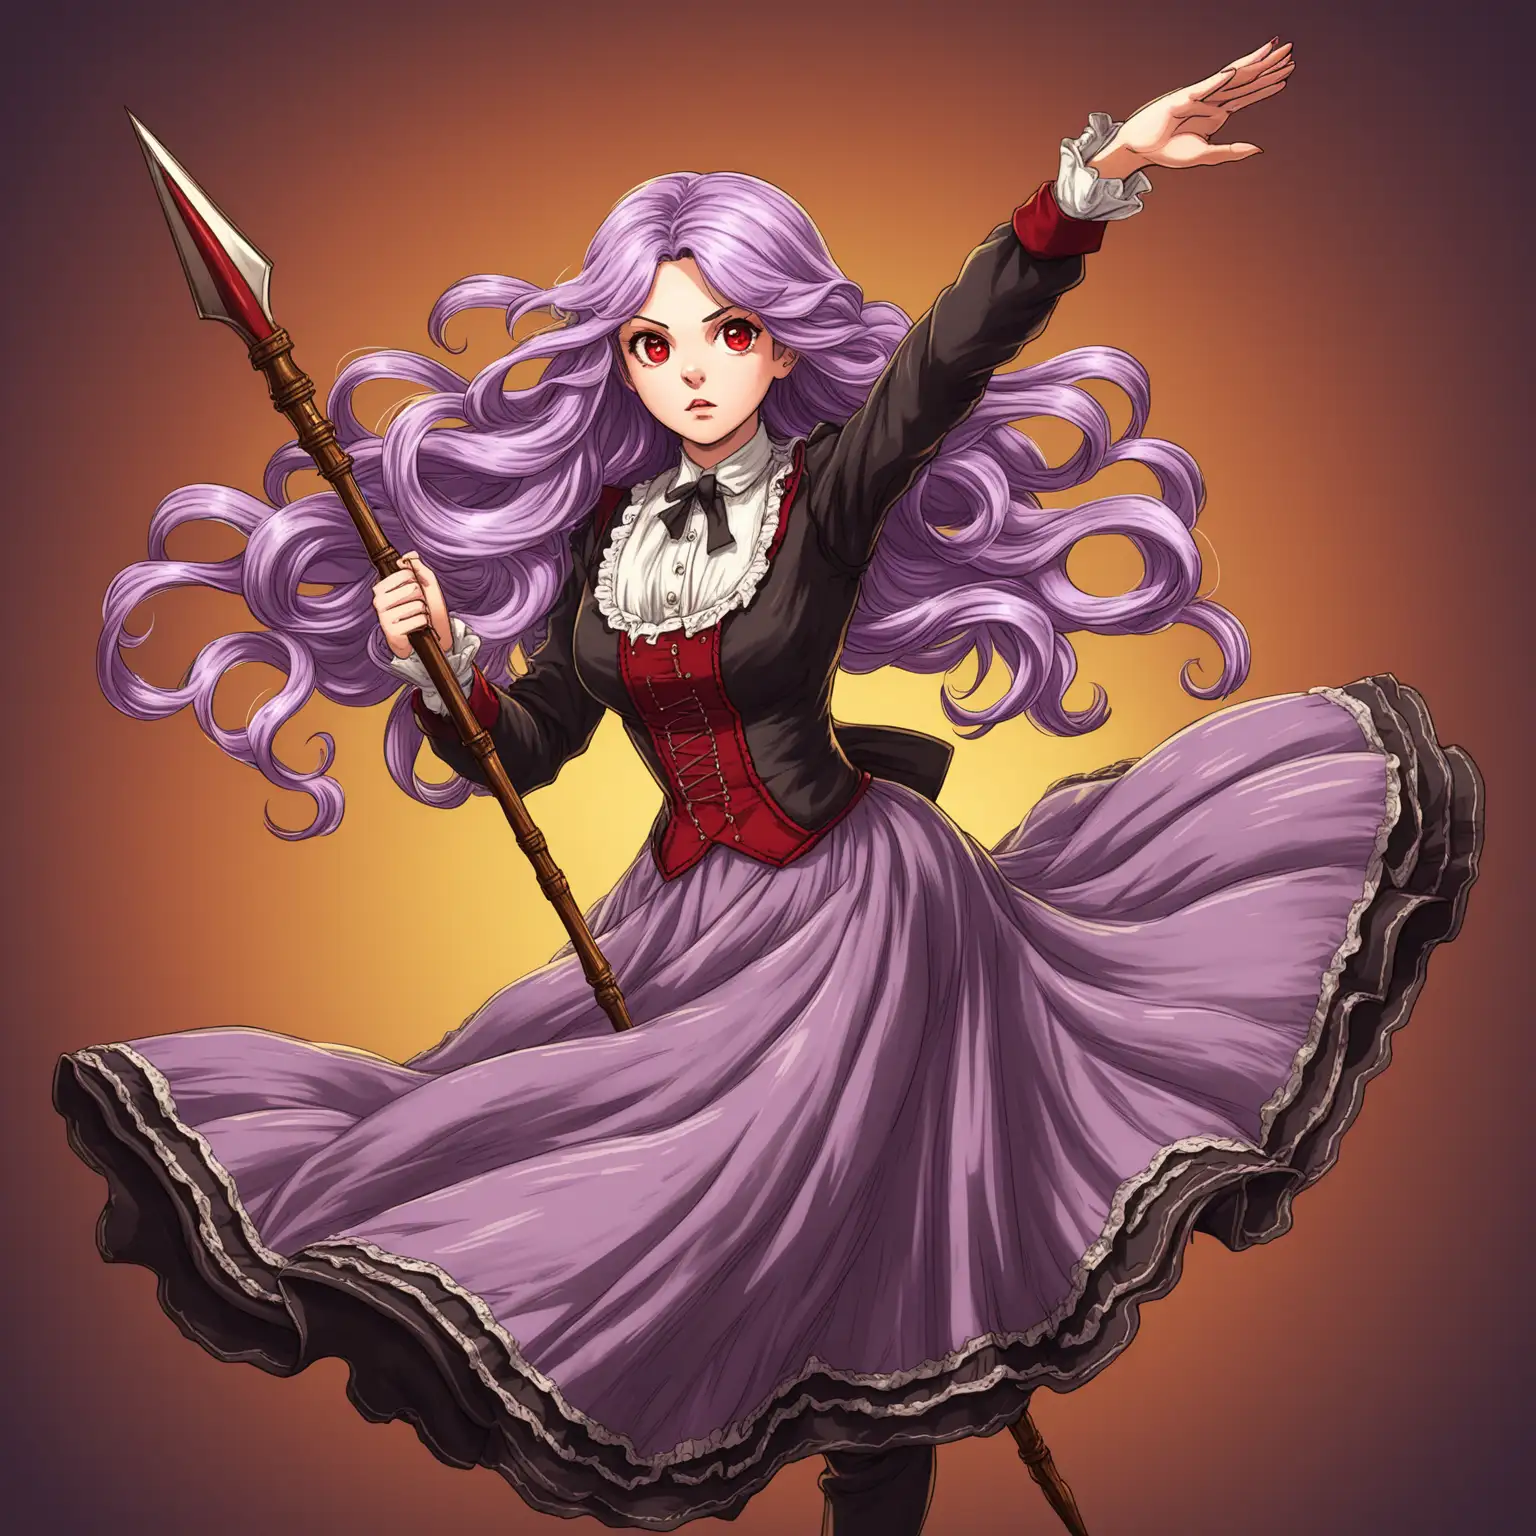 Female, long wavy lilac hair, red eyes, old timey outfit, vibrant spear, dynamic pose